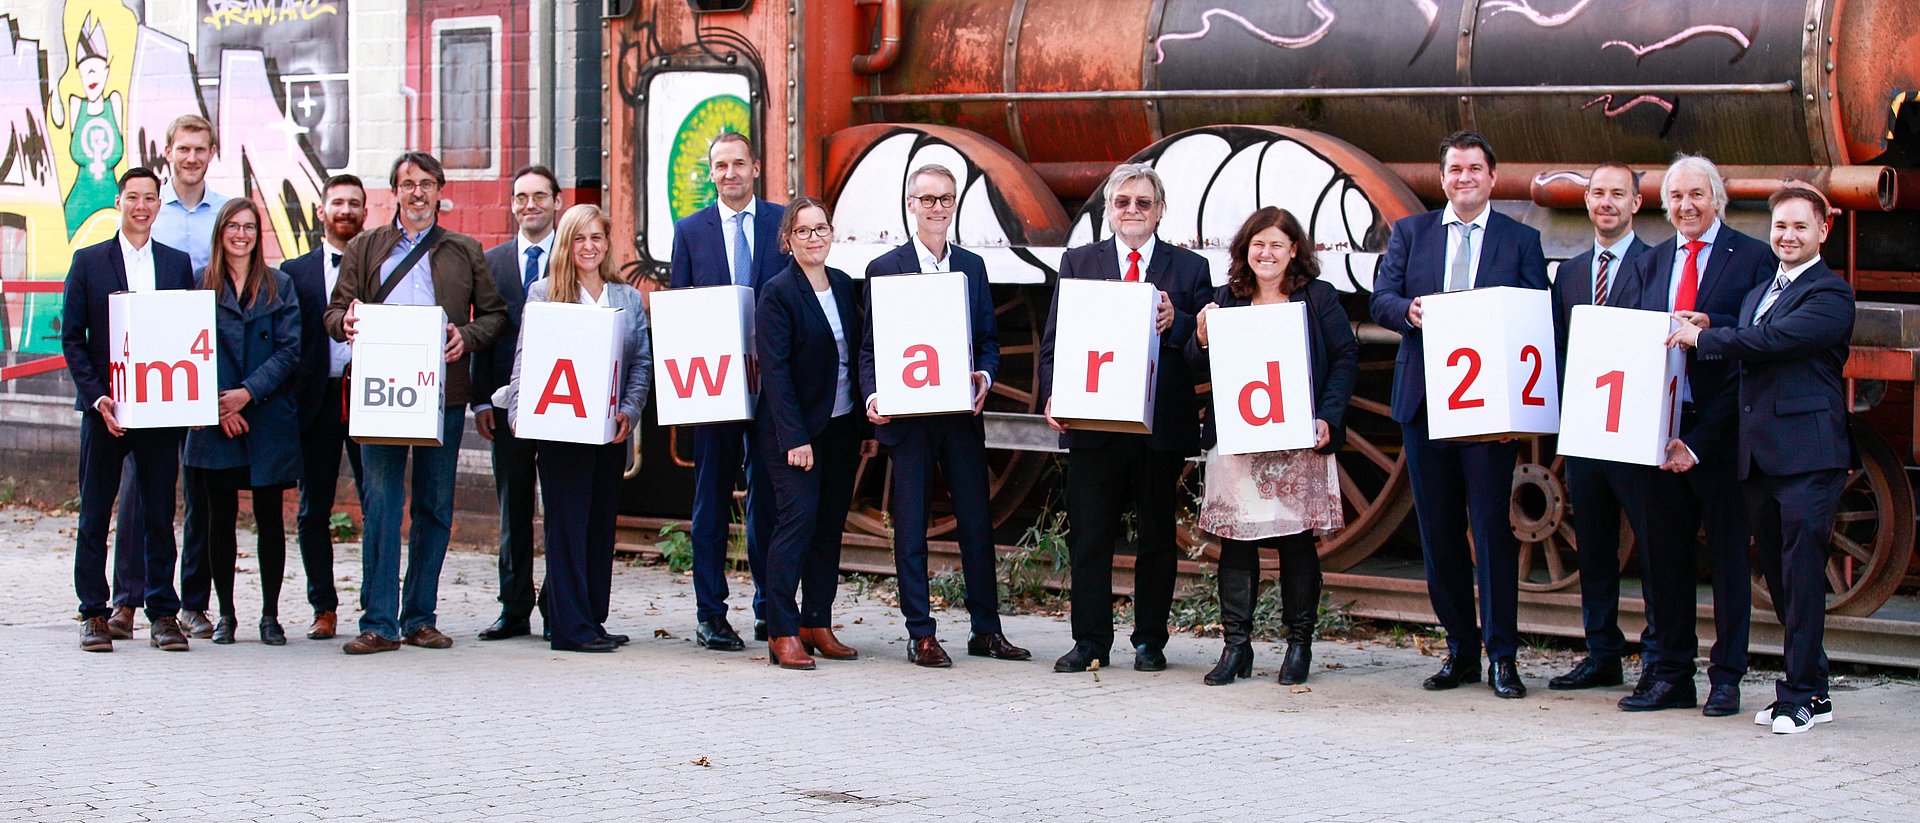 The winning teams of the m4 Award 2021 with Dr. Manfred Wolter (StMWi, 7th from right) and Prof. Horst Domdey (CEO of BioM, 6th from right).